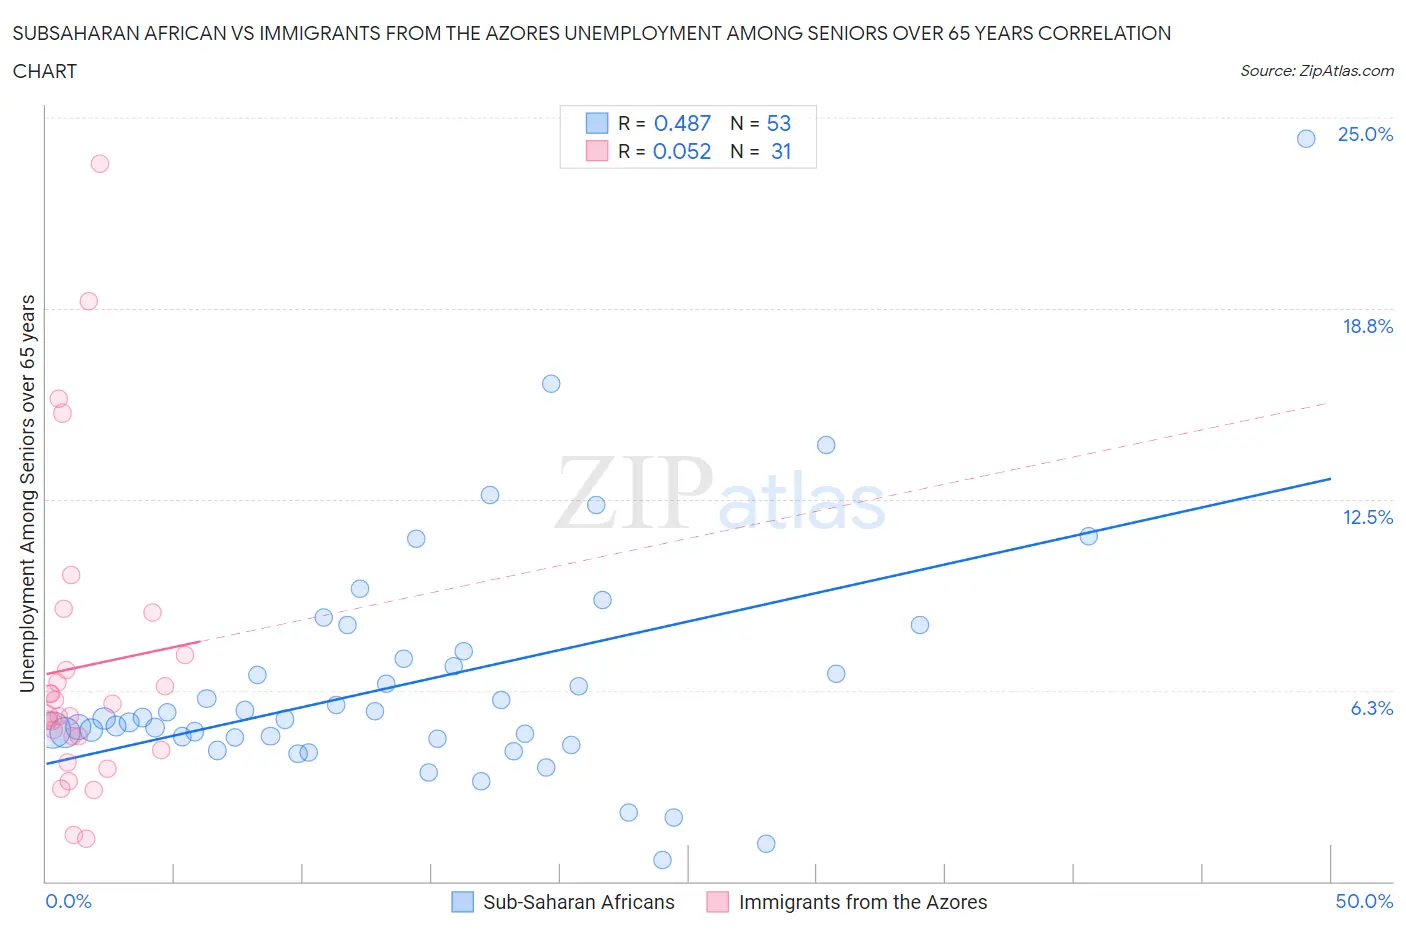 Subsaharan African vs Immigrants from the Azores Unemployment Among Seniors over 65 years